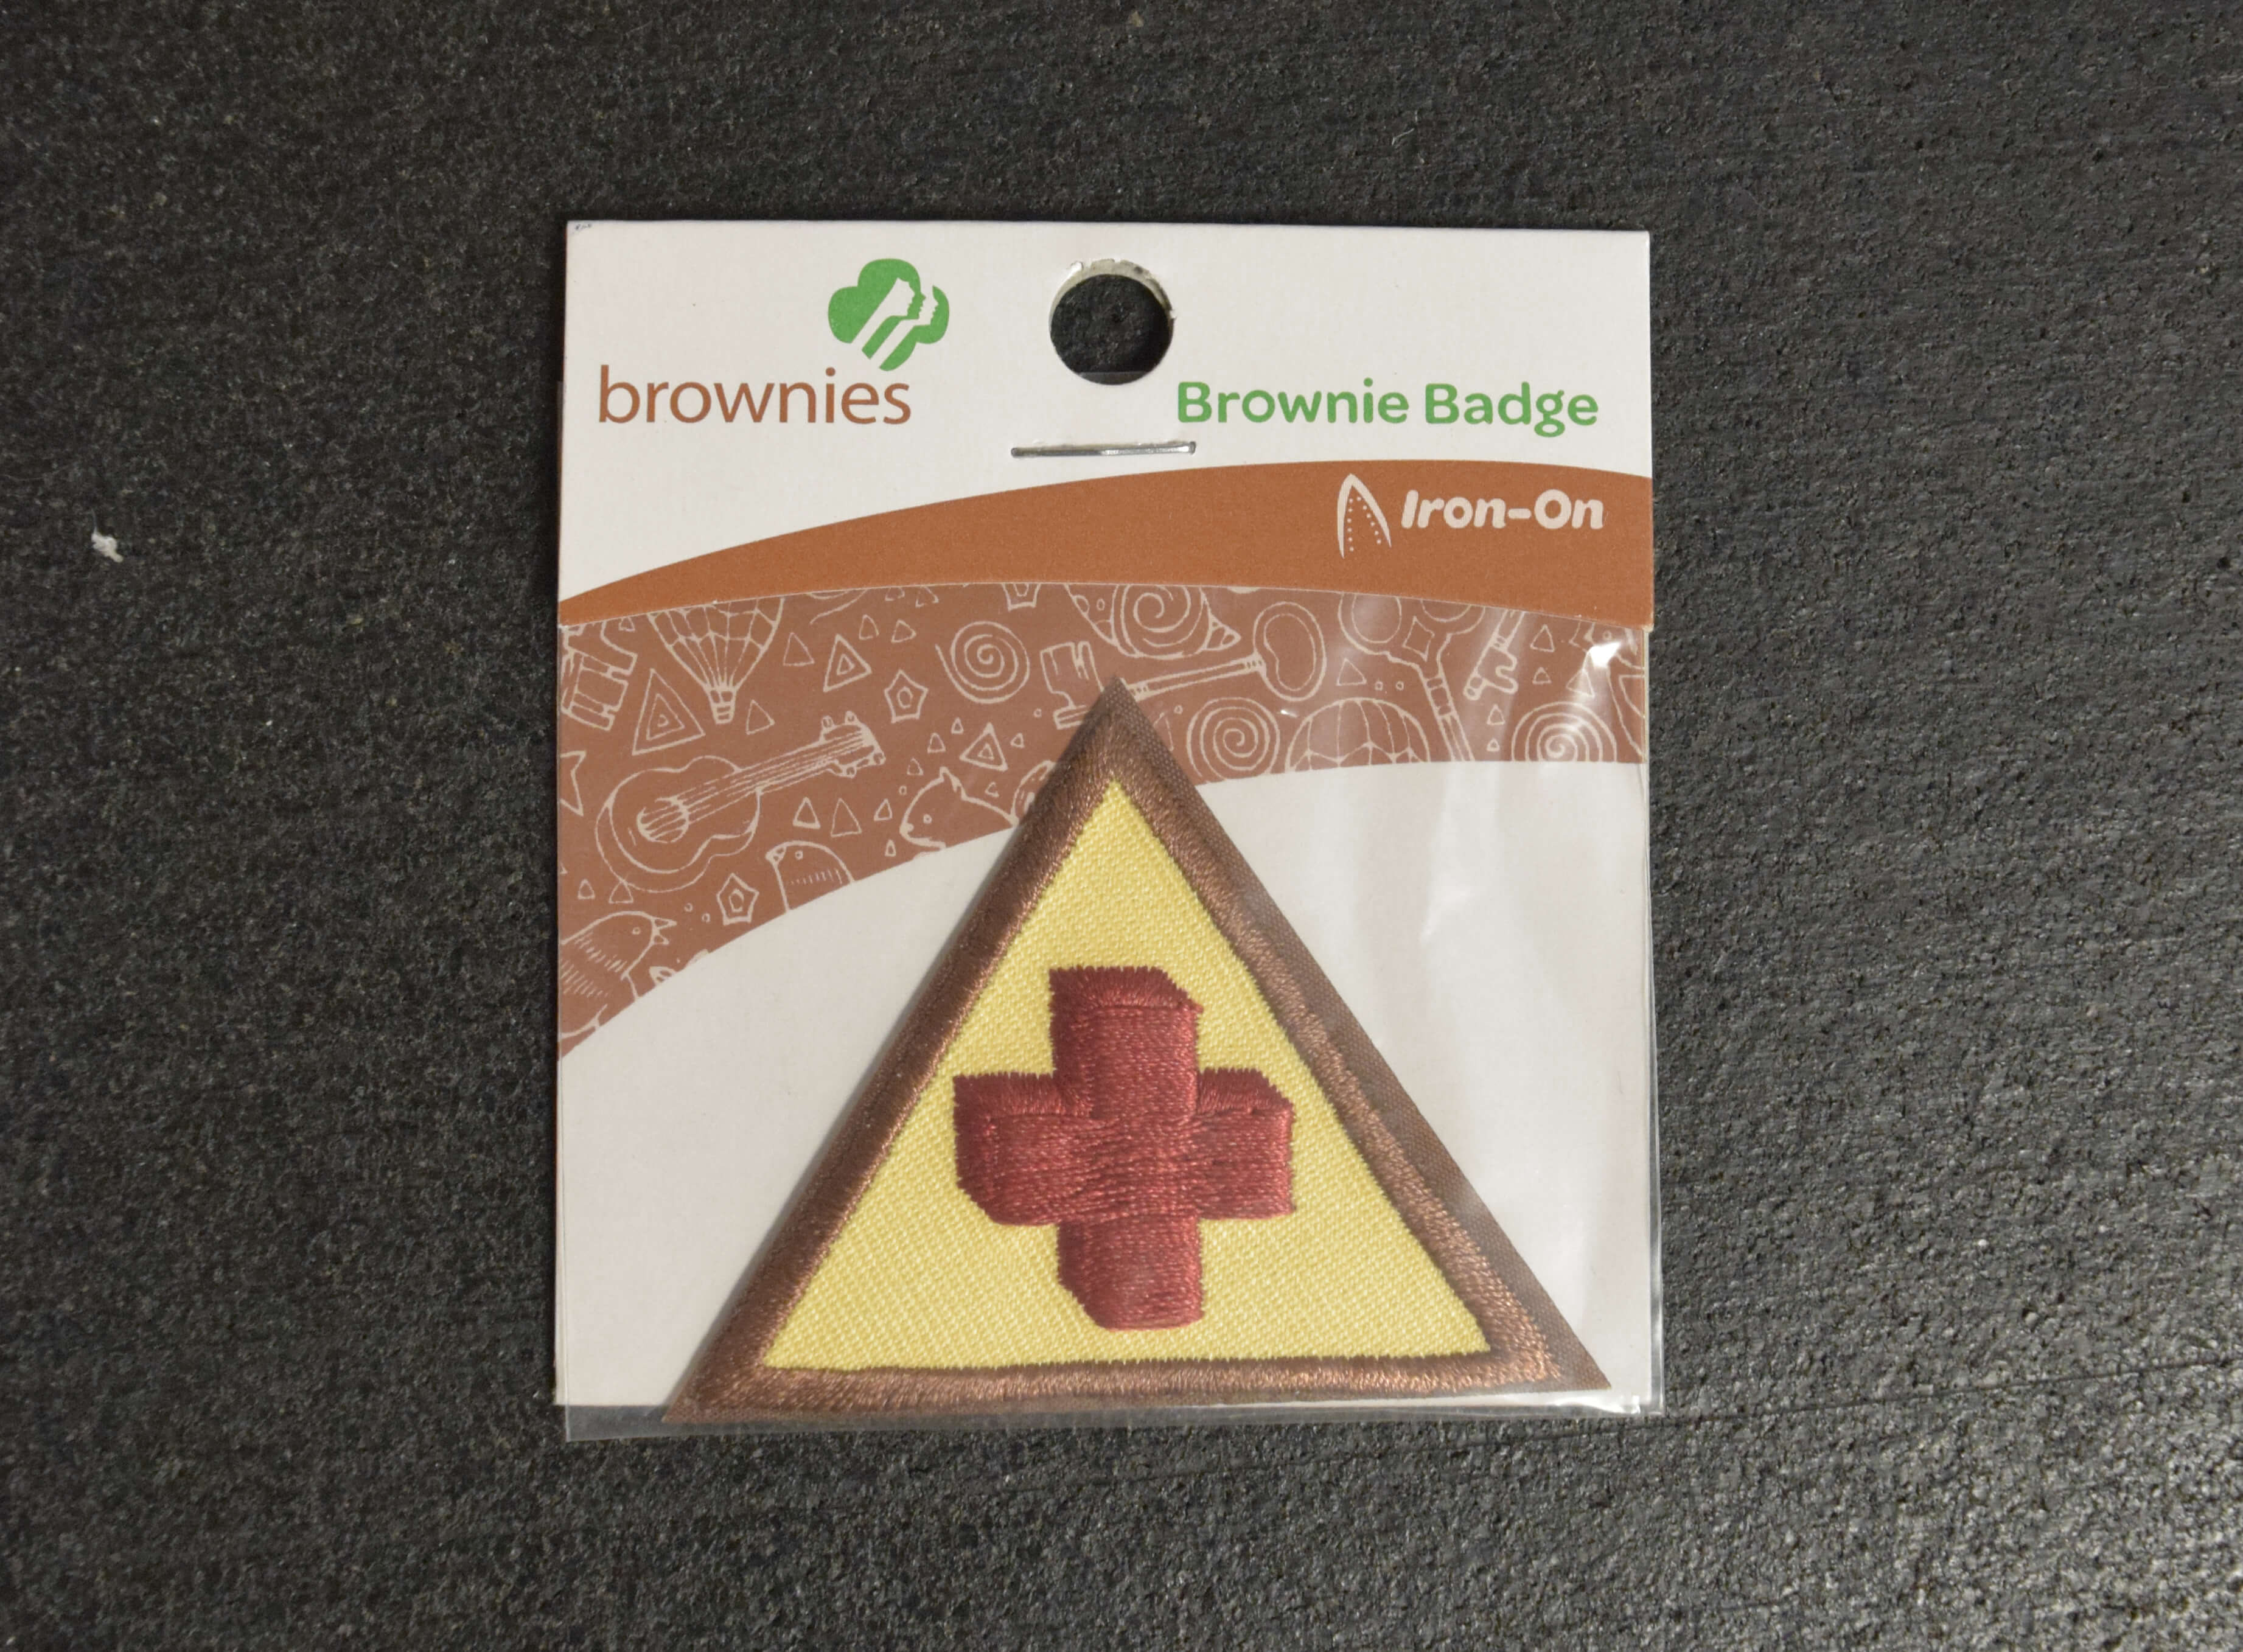 brownies first aid kit badge girl scouts middle tennessee troop 2975 williamson medical center county franklin hospital